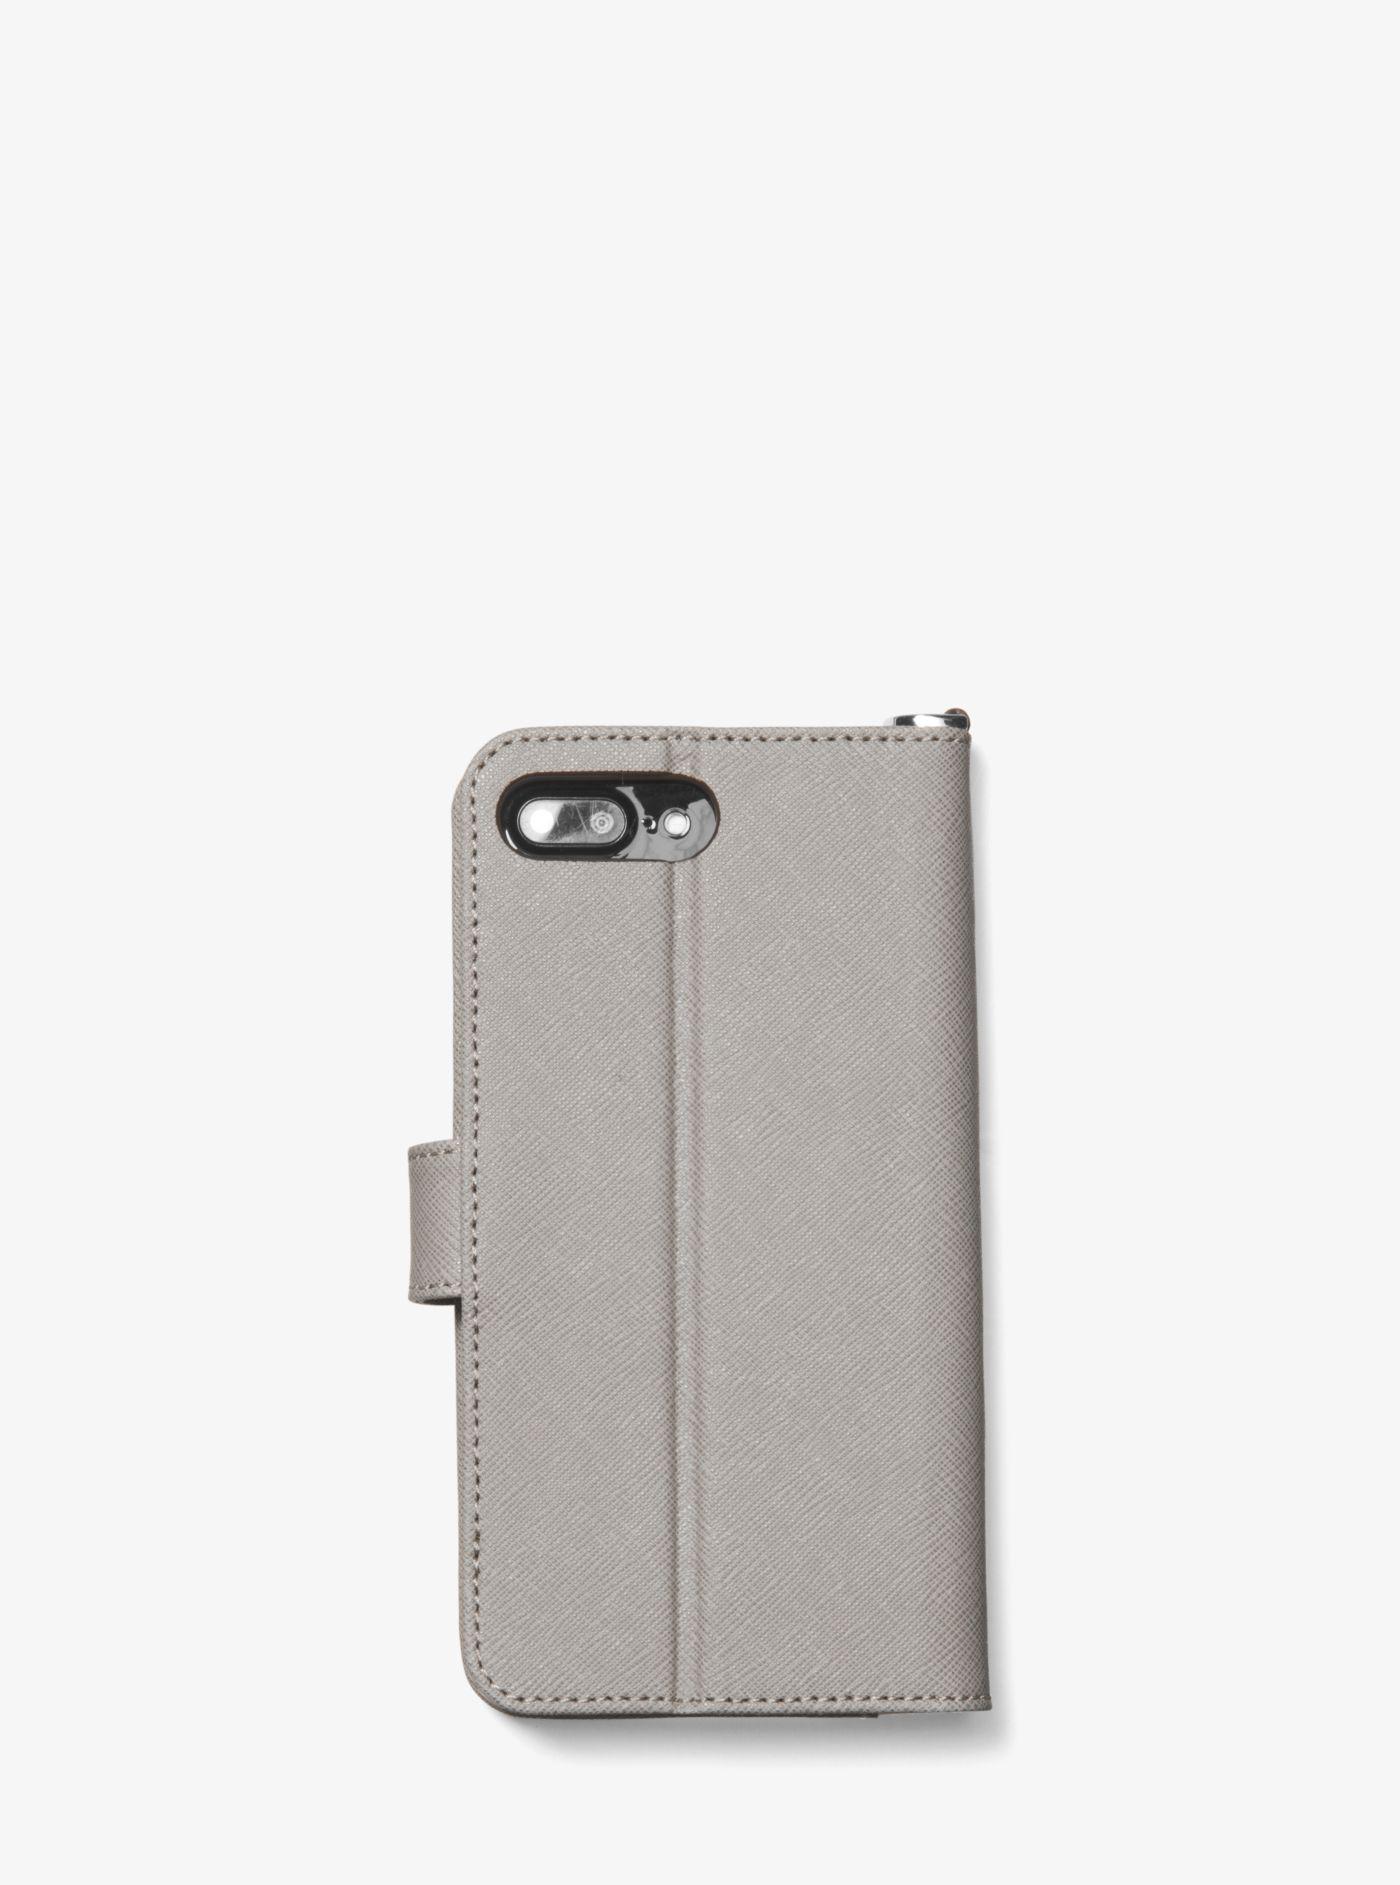 Michael Kors Saffiano Leather Folio Case Iphone 7/8 Plus in Pearl Grey - Lyst